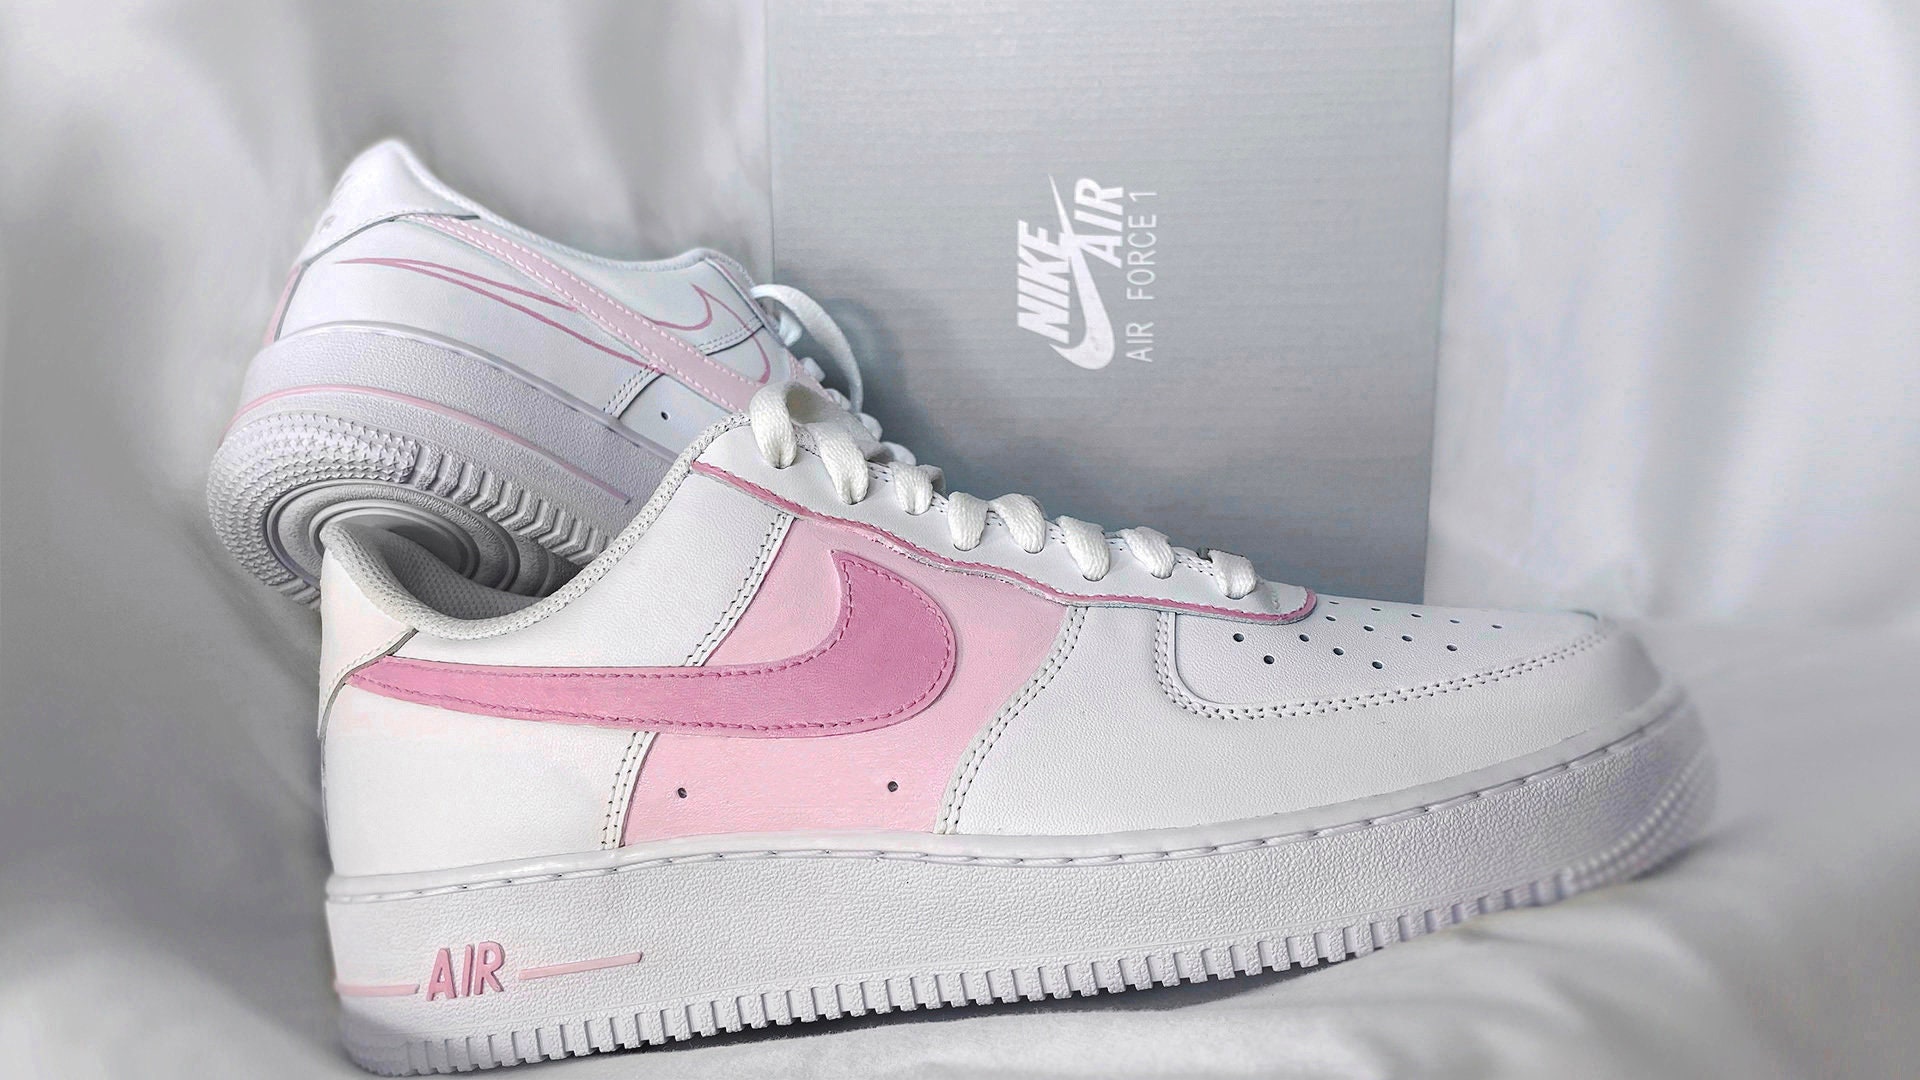 Air Force 1 Custom Low Pastel Shoes Purple Yellow Blue Green Pink All –  Rose Customs, Air Force 1 Custom Shoes Sneakers Design Your Own AF1